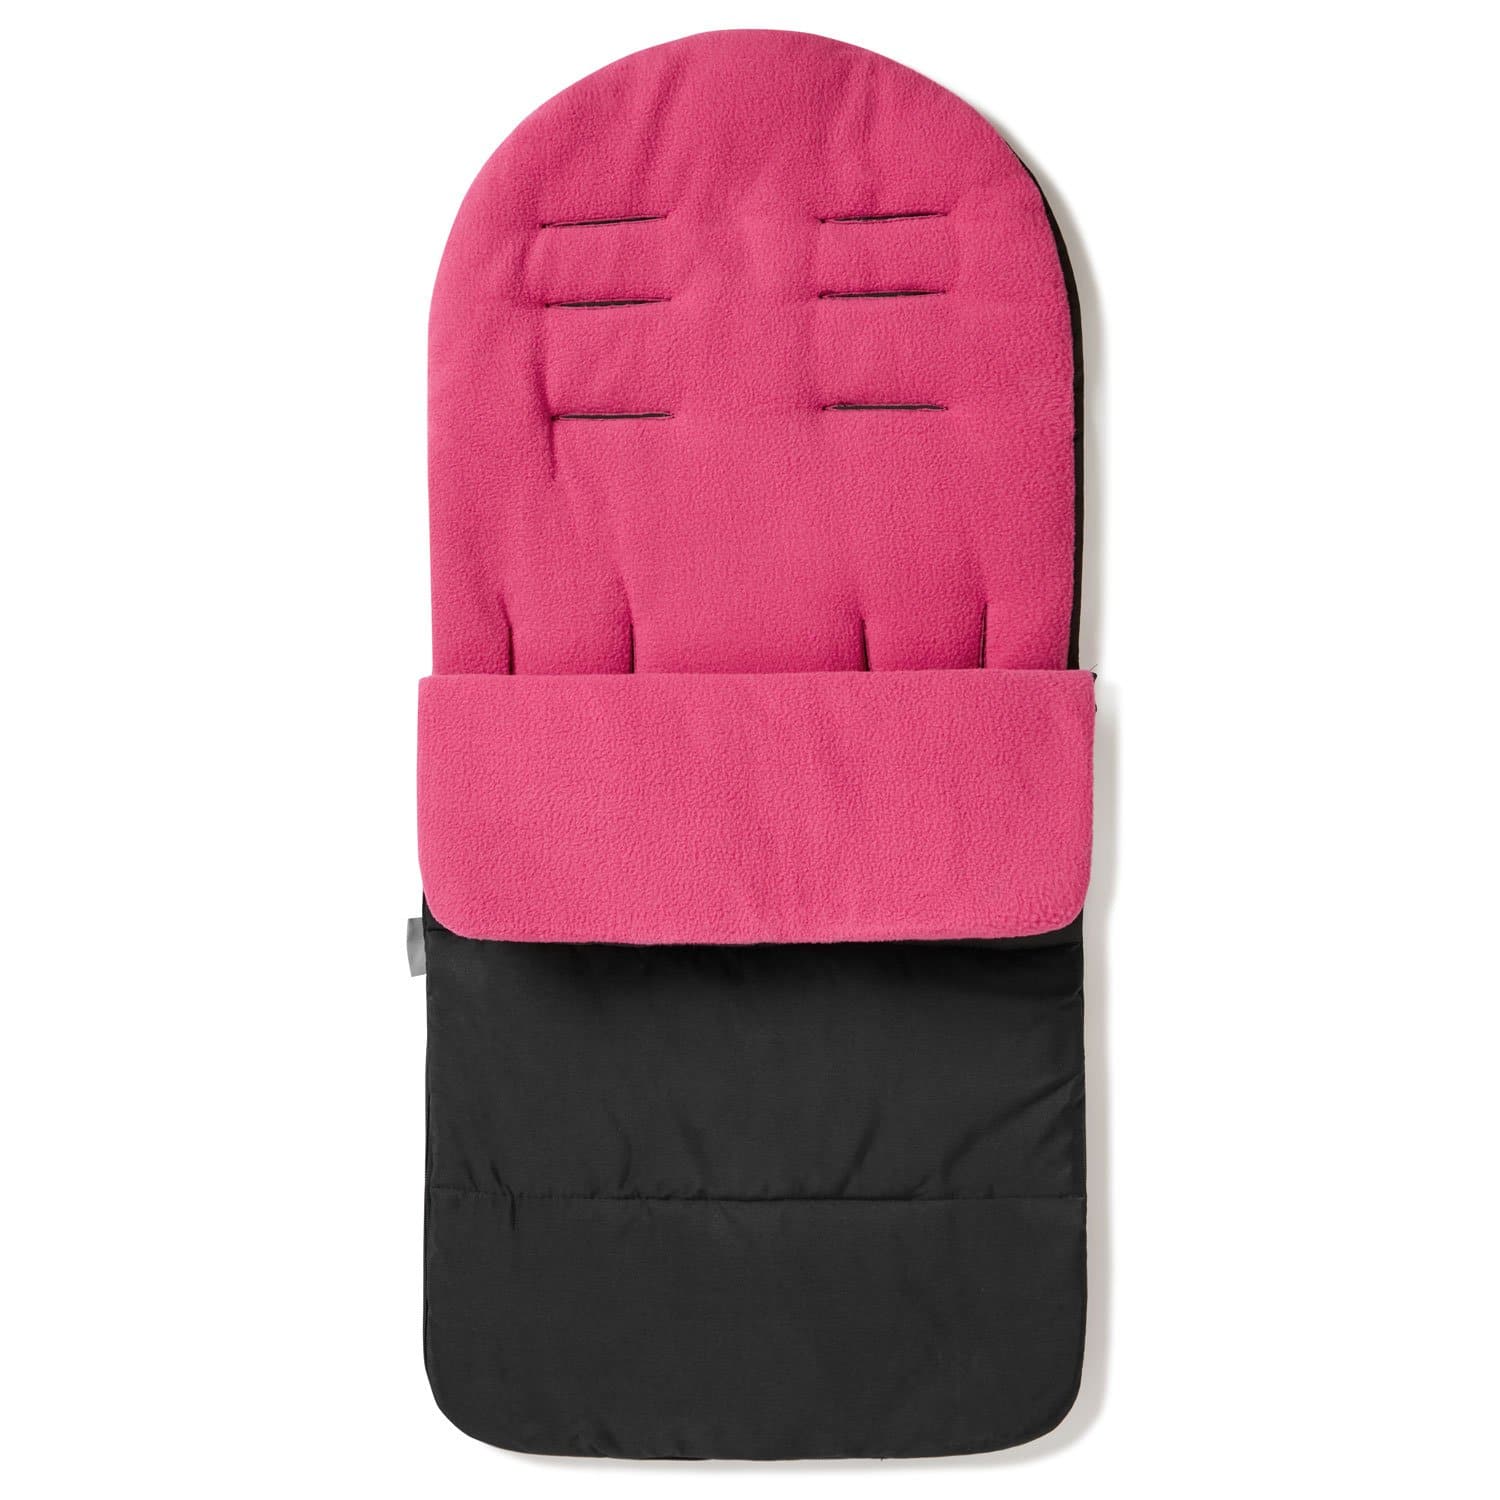 Premium Footmuff / Cosy Toes Compatible with Kiddicare - For Your Little One